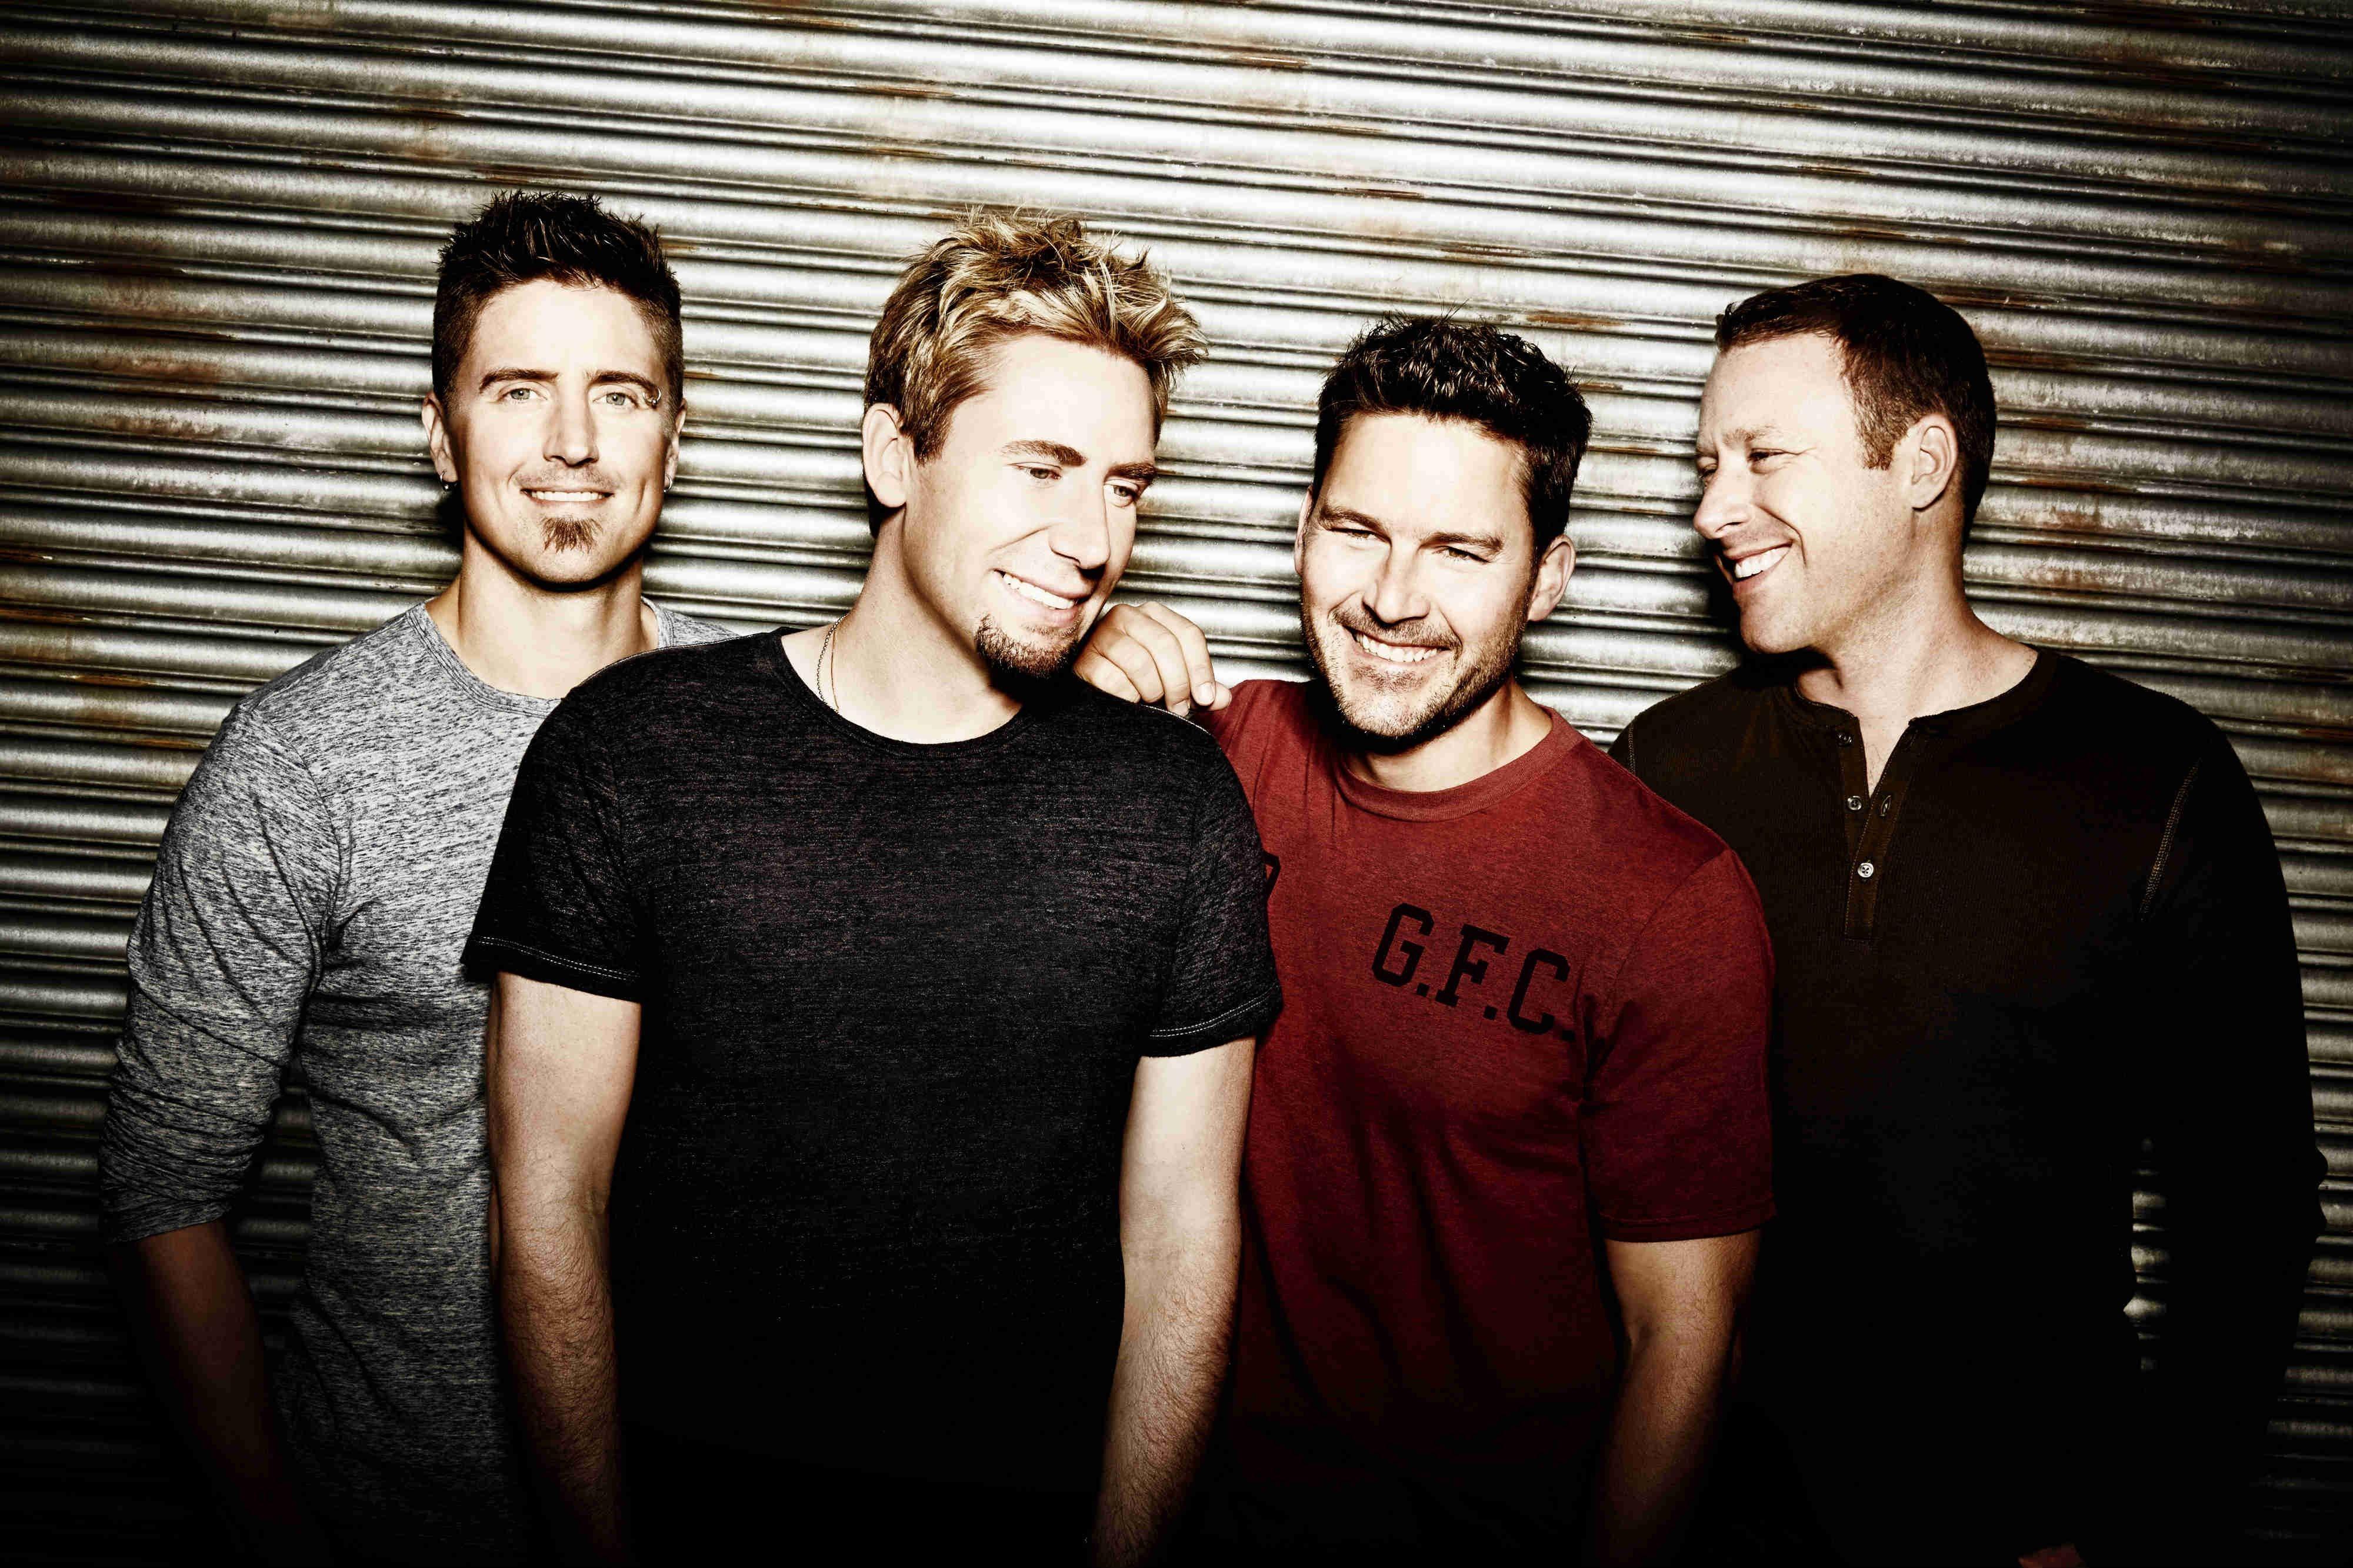 Nickelback Wallpaper HD Pack By Fullerton Round 2016 01 04